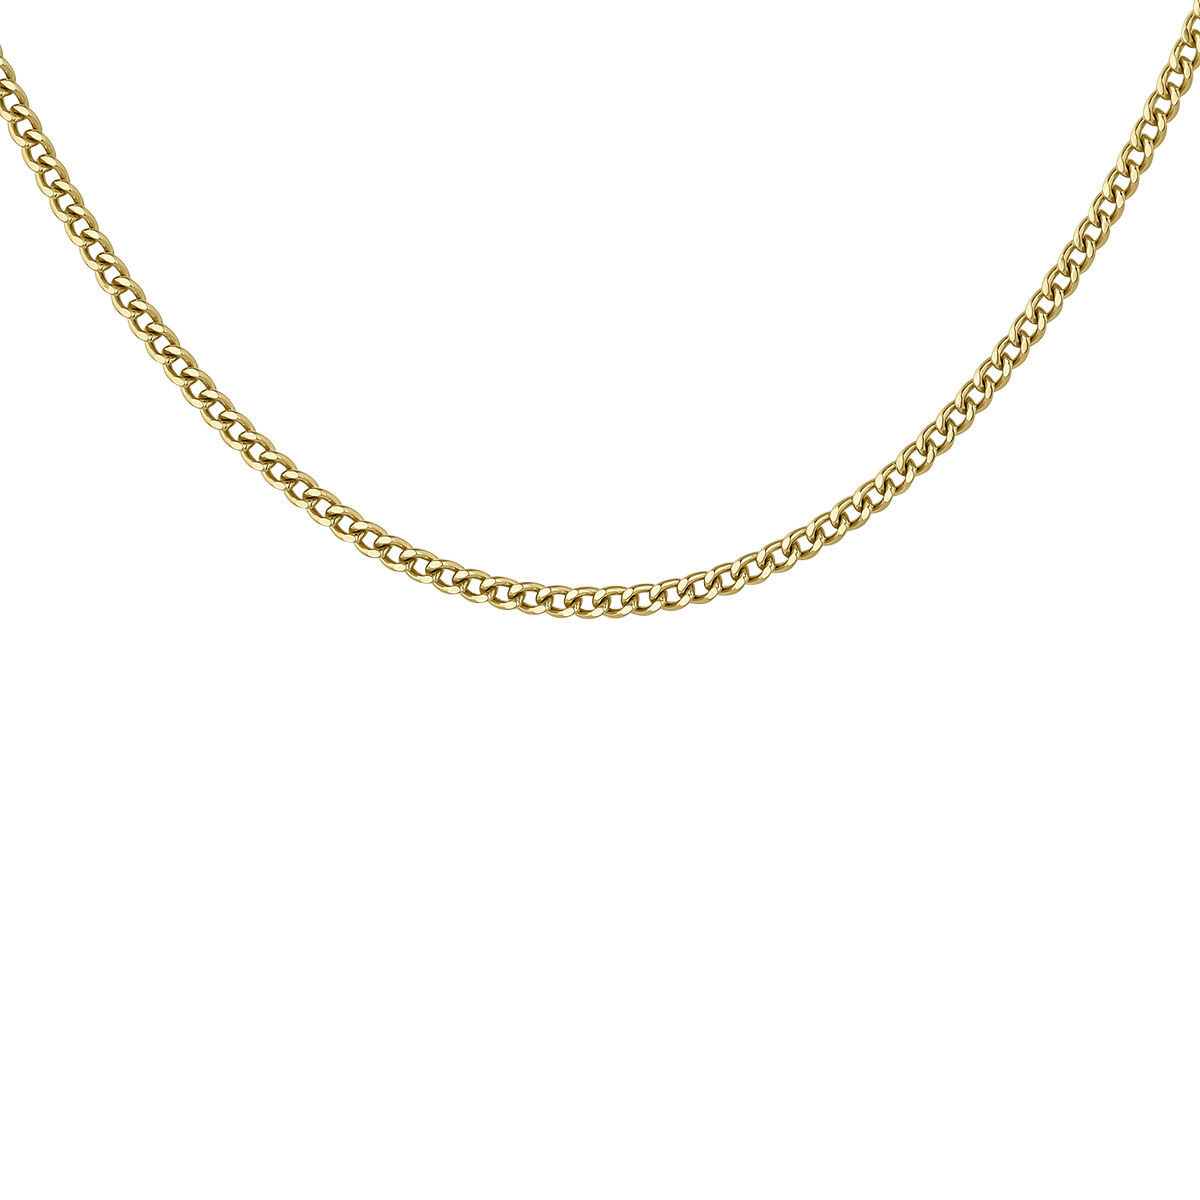 Thin chain with flat curb links in 9k yellow gold, J05326-02, hi-res